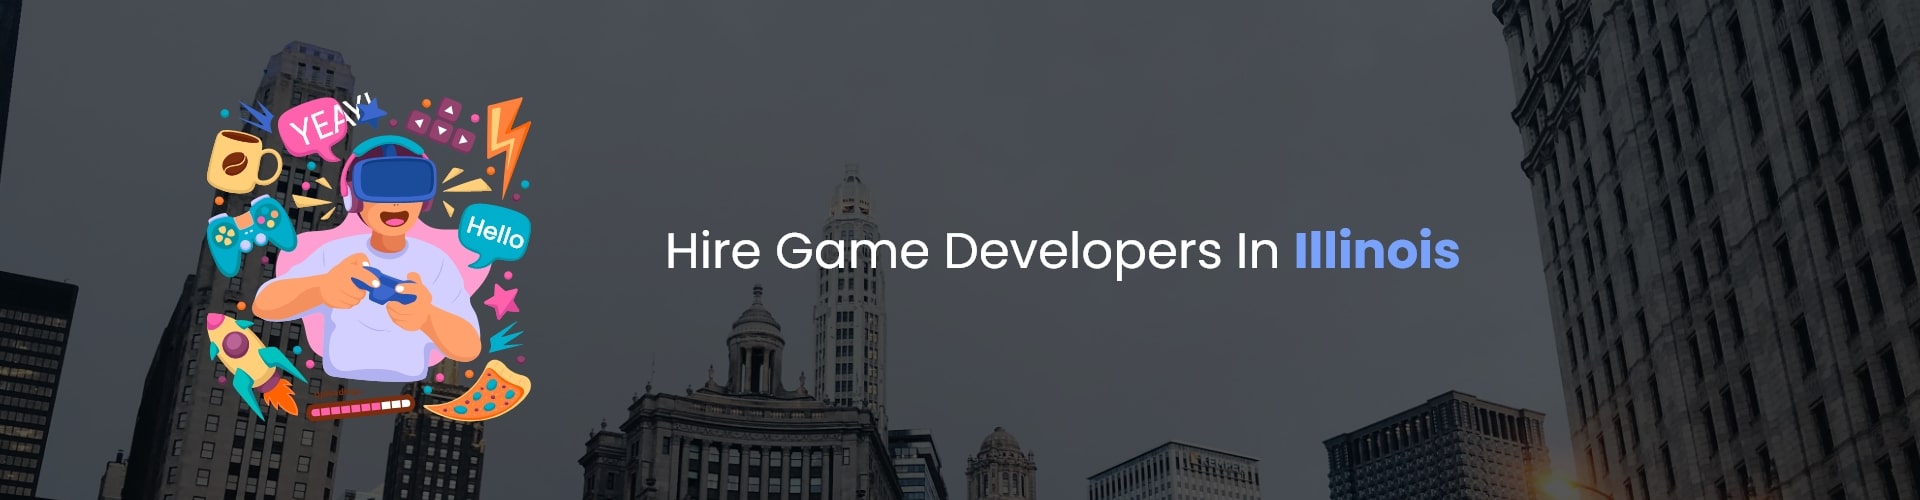 hire game developers in illinois